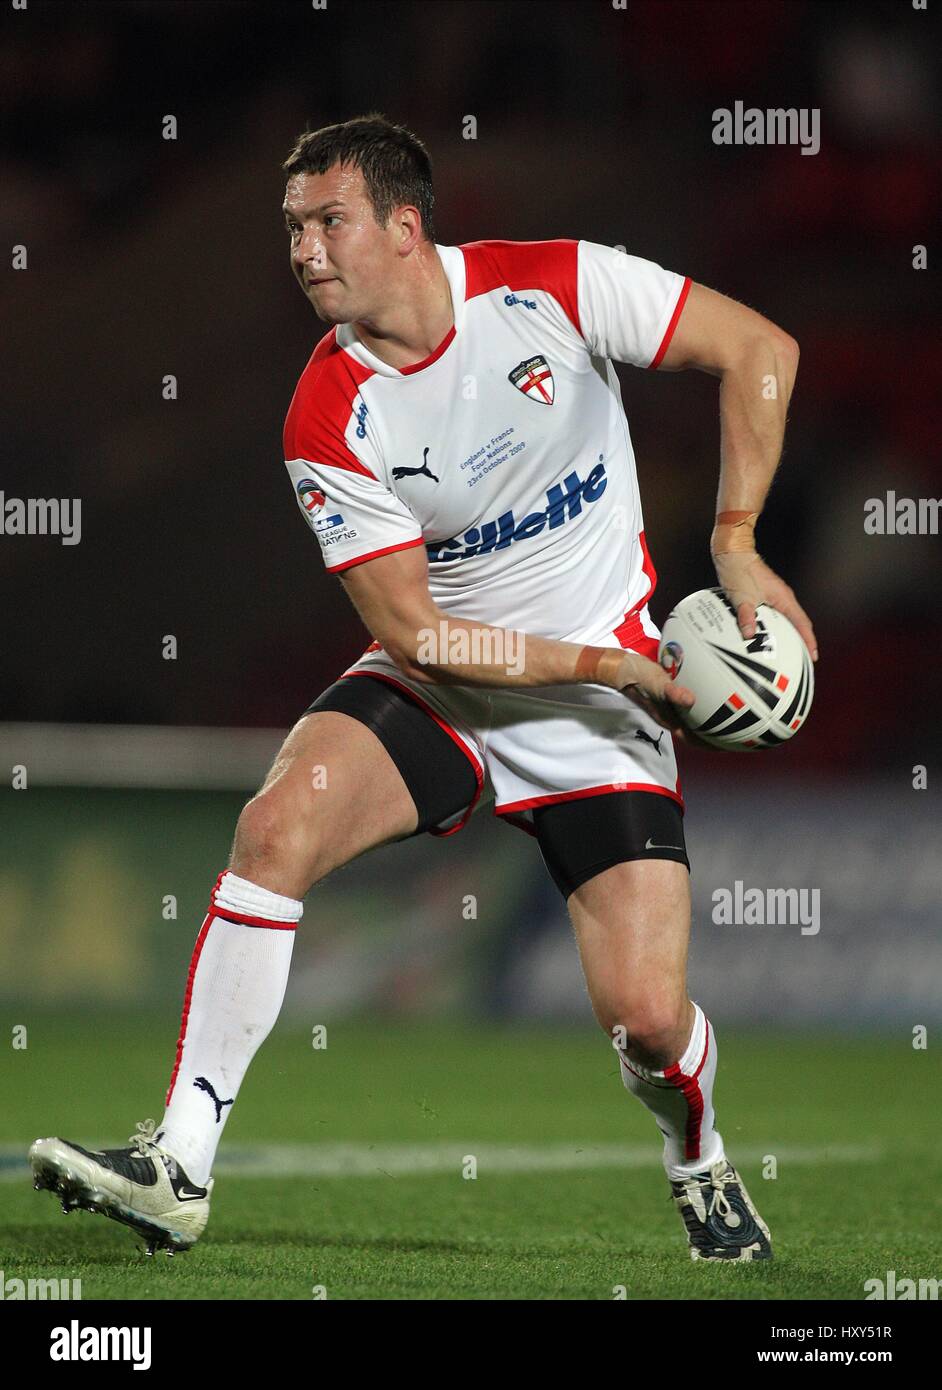 DANNY MCGUIRE ENGLAND RUGBY LEAGUE KEEPMOAT Stadion DONCASTER ENGLAND 23. Oktober 2009 Stockfoto